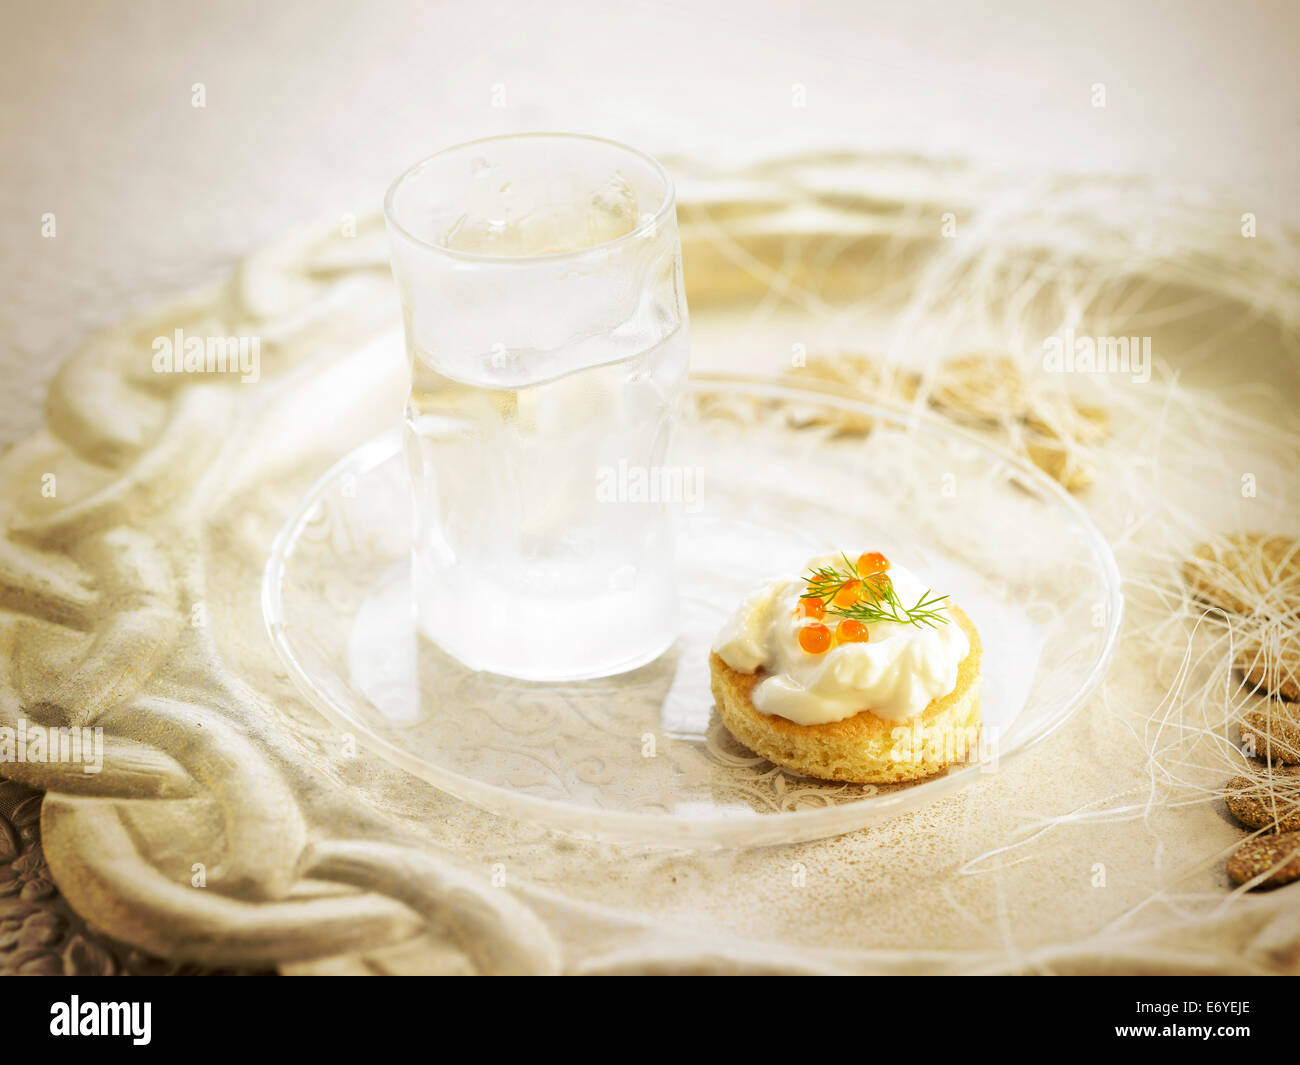 Glass of vodka and fish roe canapé Stock Photo